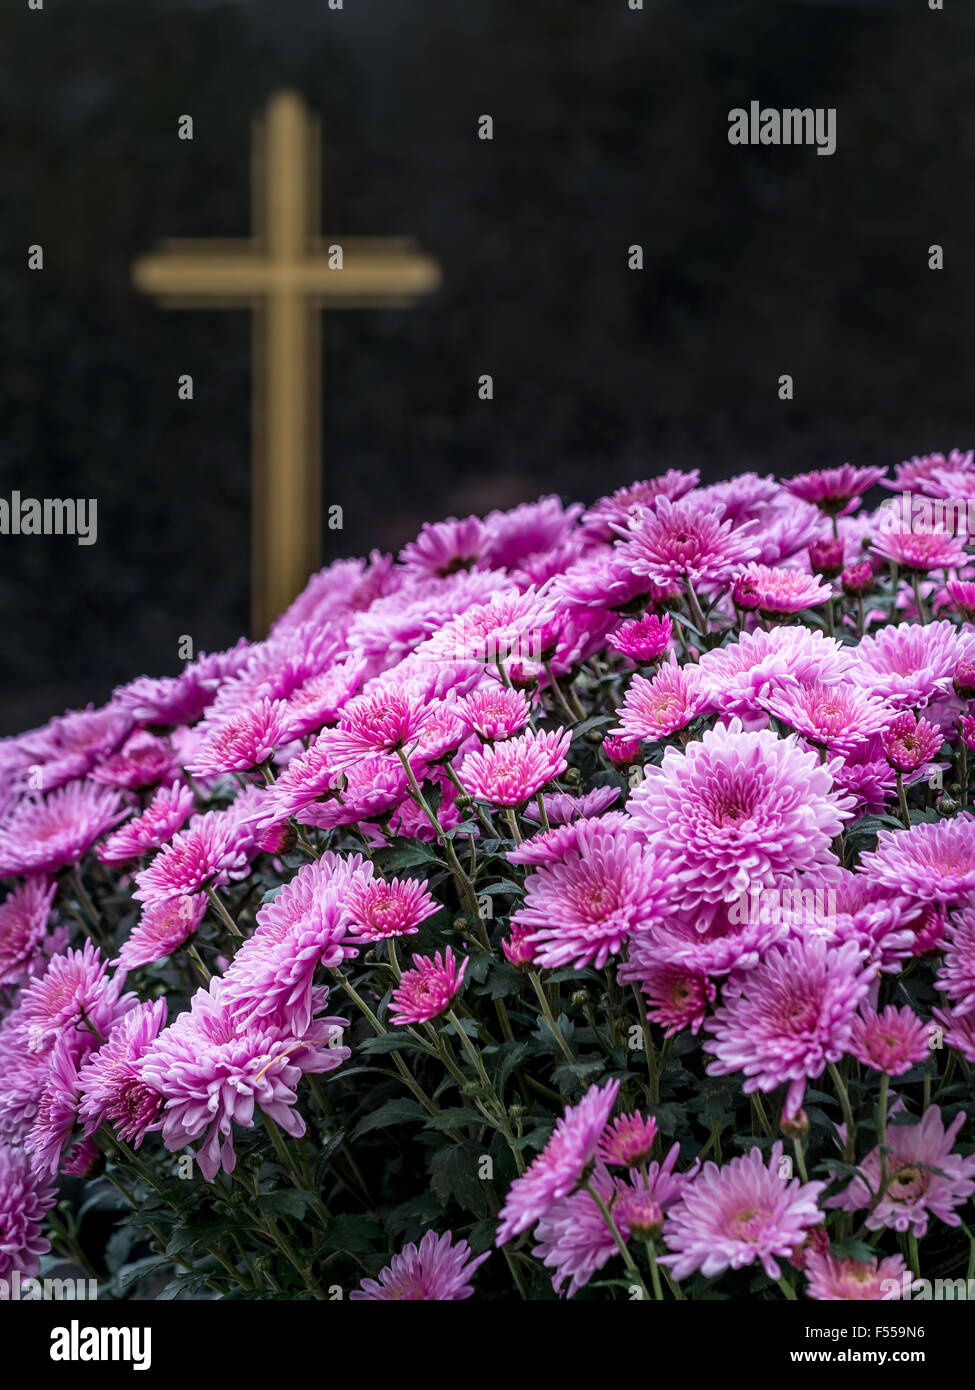 Closeup of black granite tombstone with flowers Stock Photo